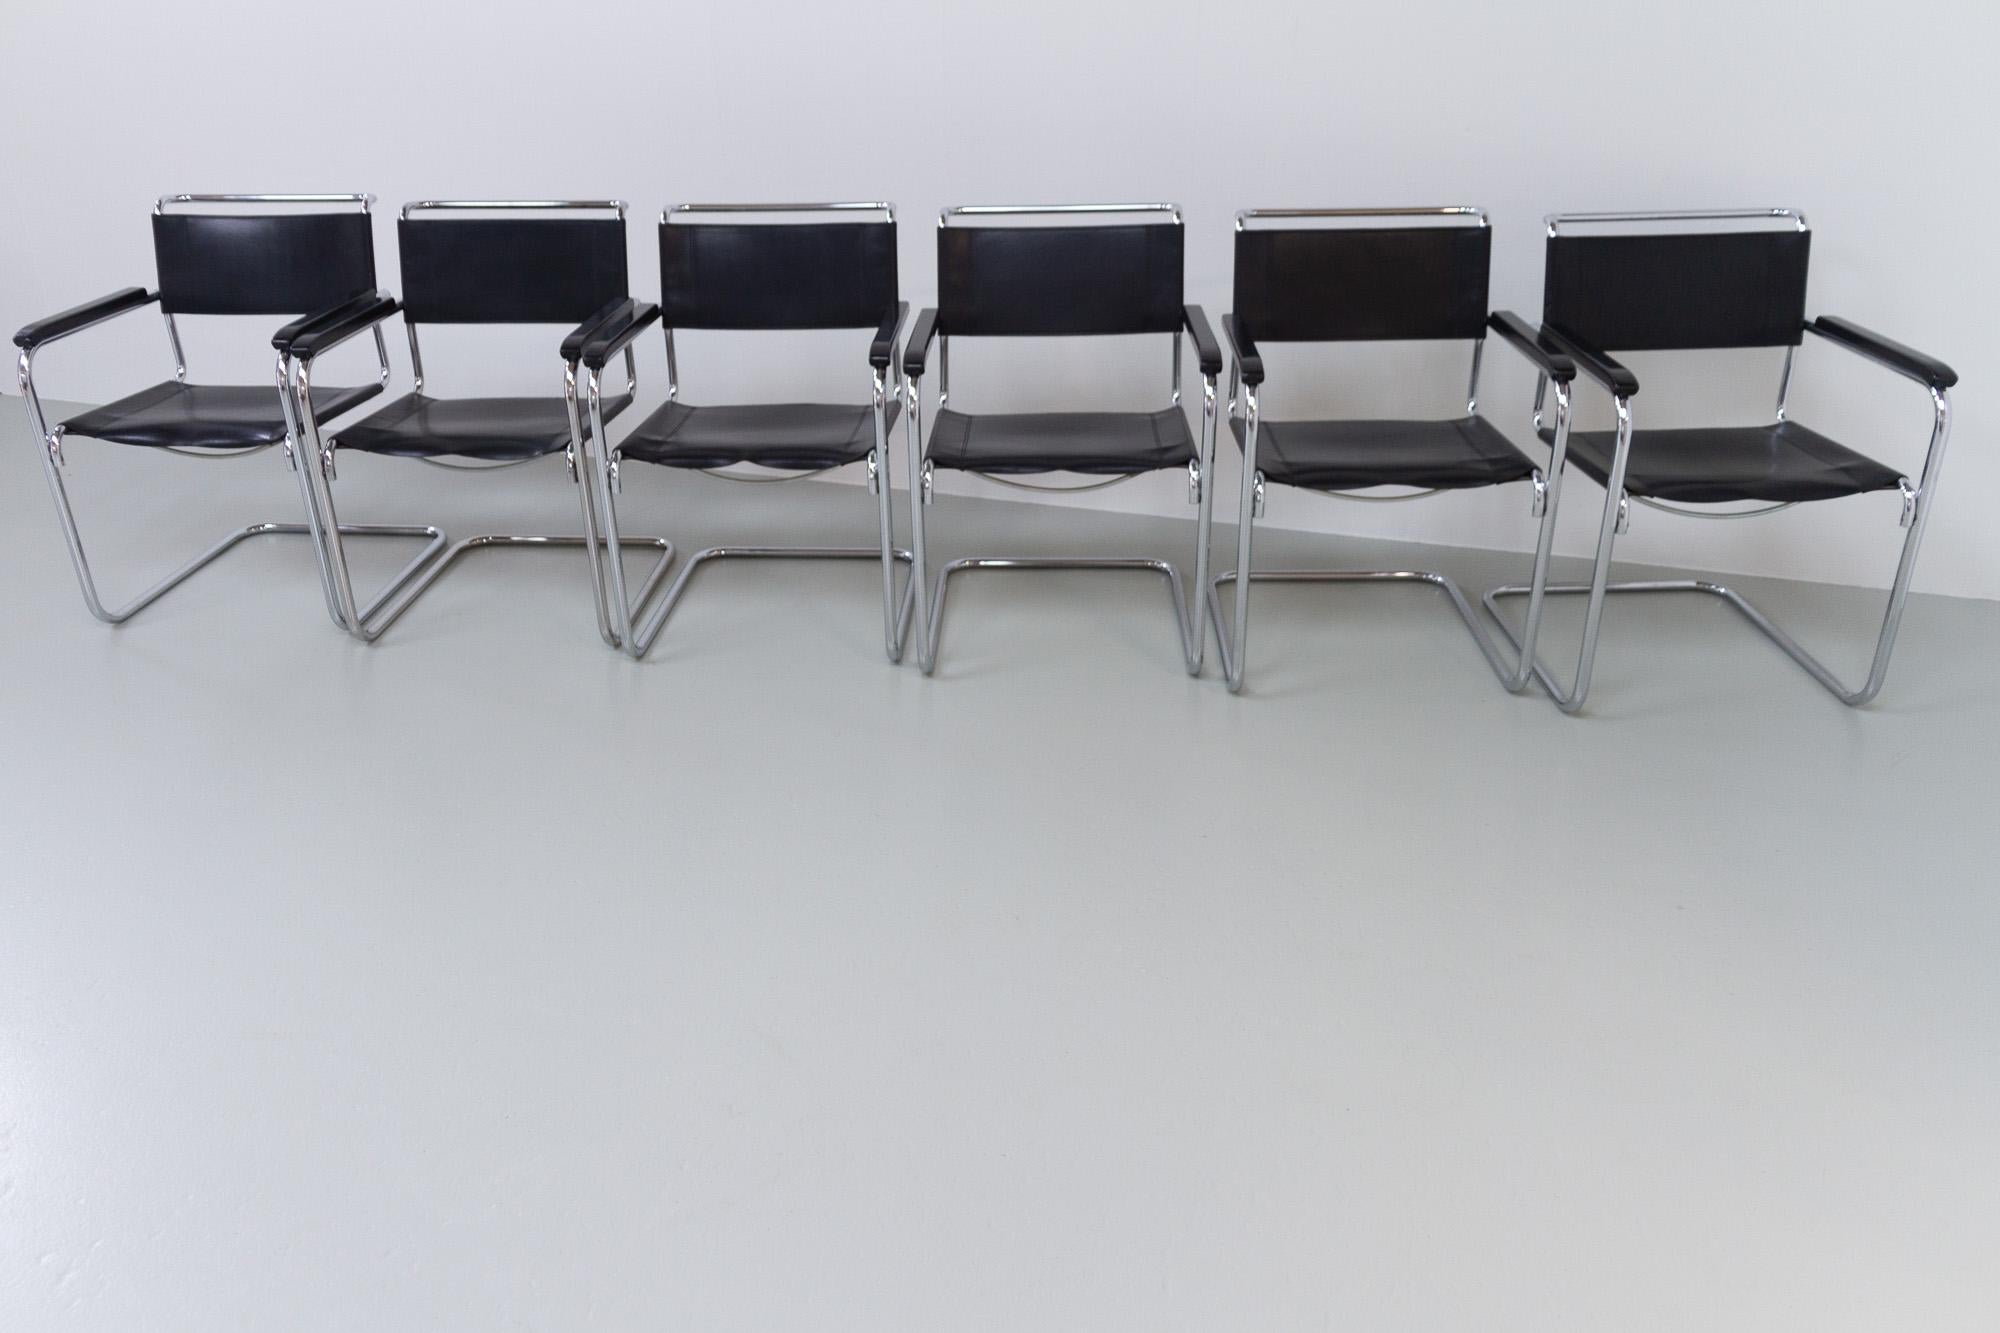 Vintage Cantilever Chairs S34 by Mart Stam for Thonet, 1980s. Set of 6. 12